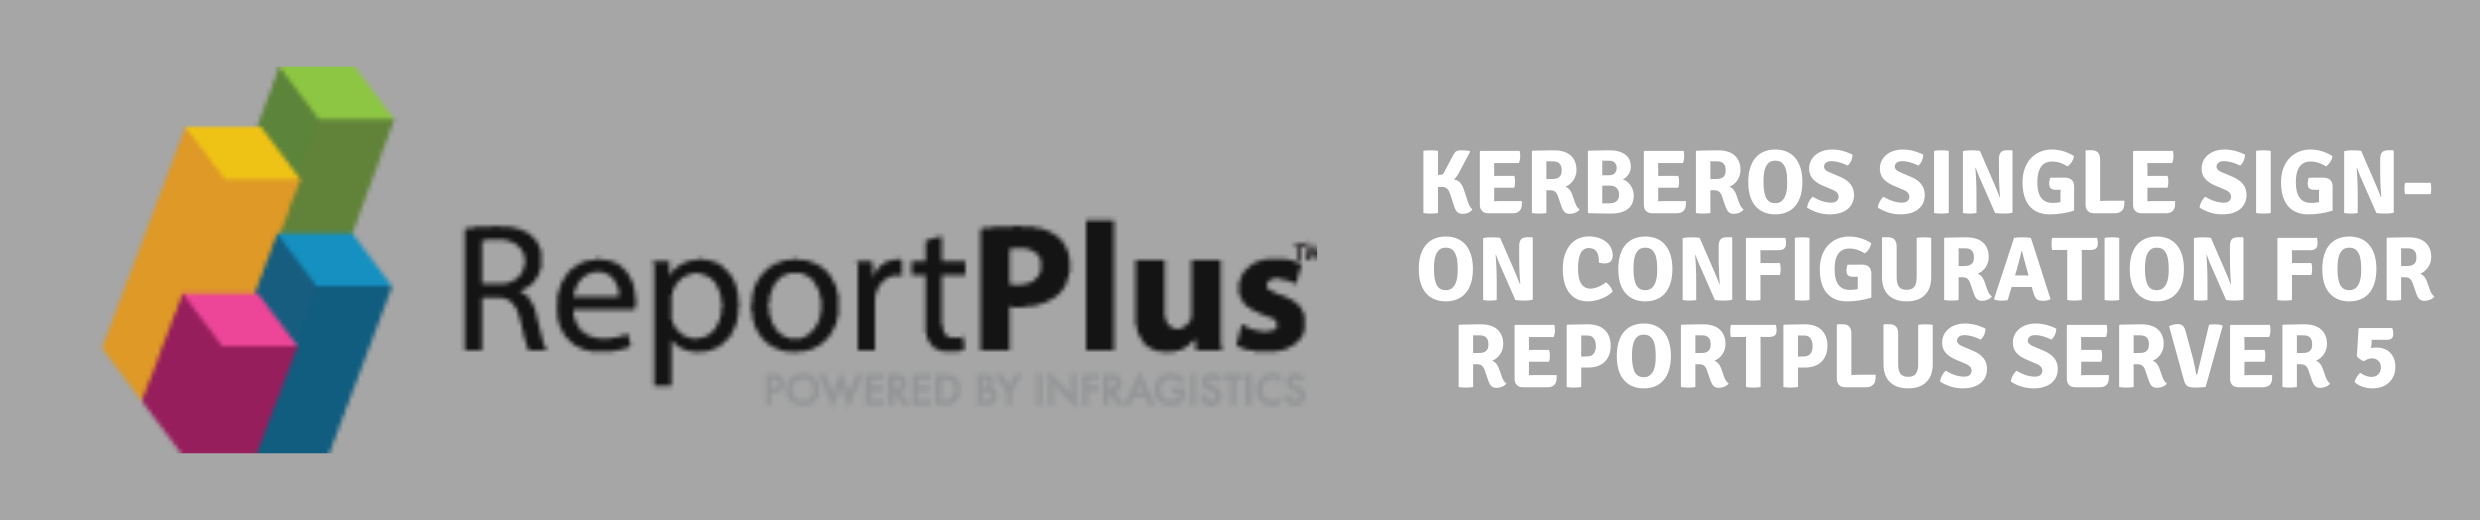 Kerberos Single-Sign On Configuration Guide for ReportPlus Server 5